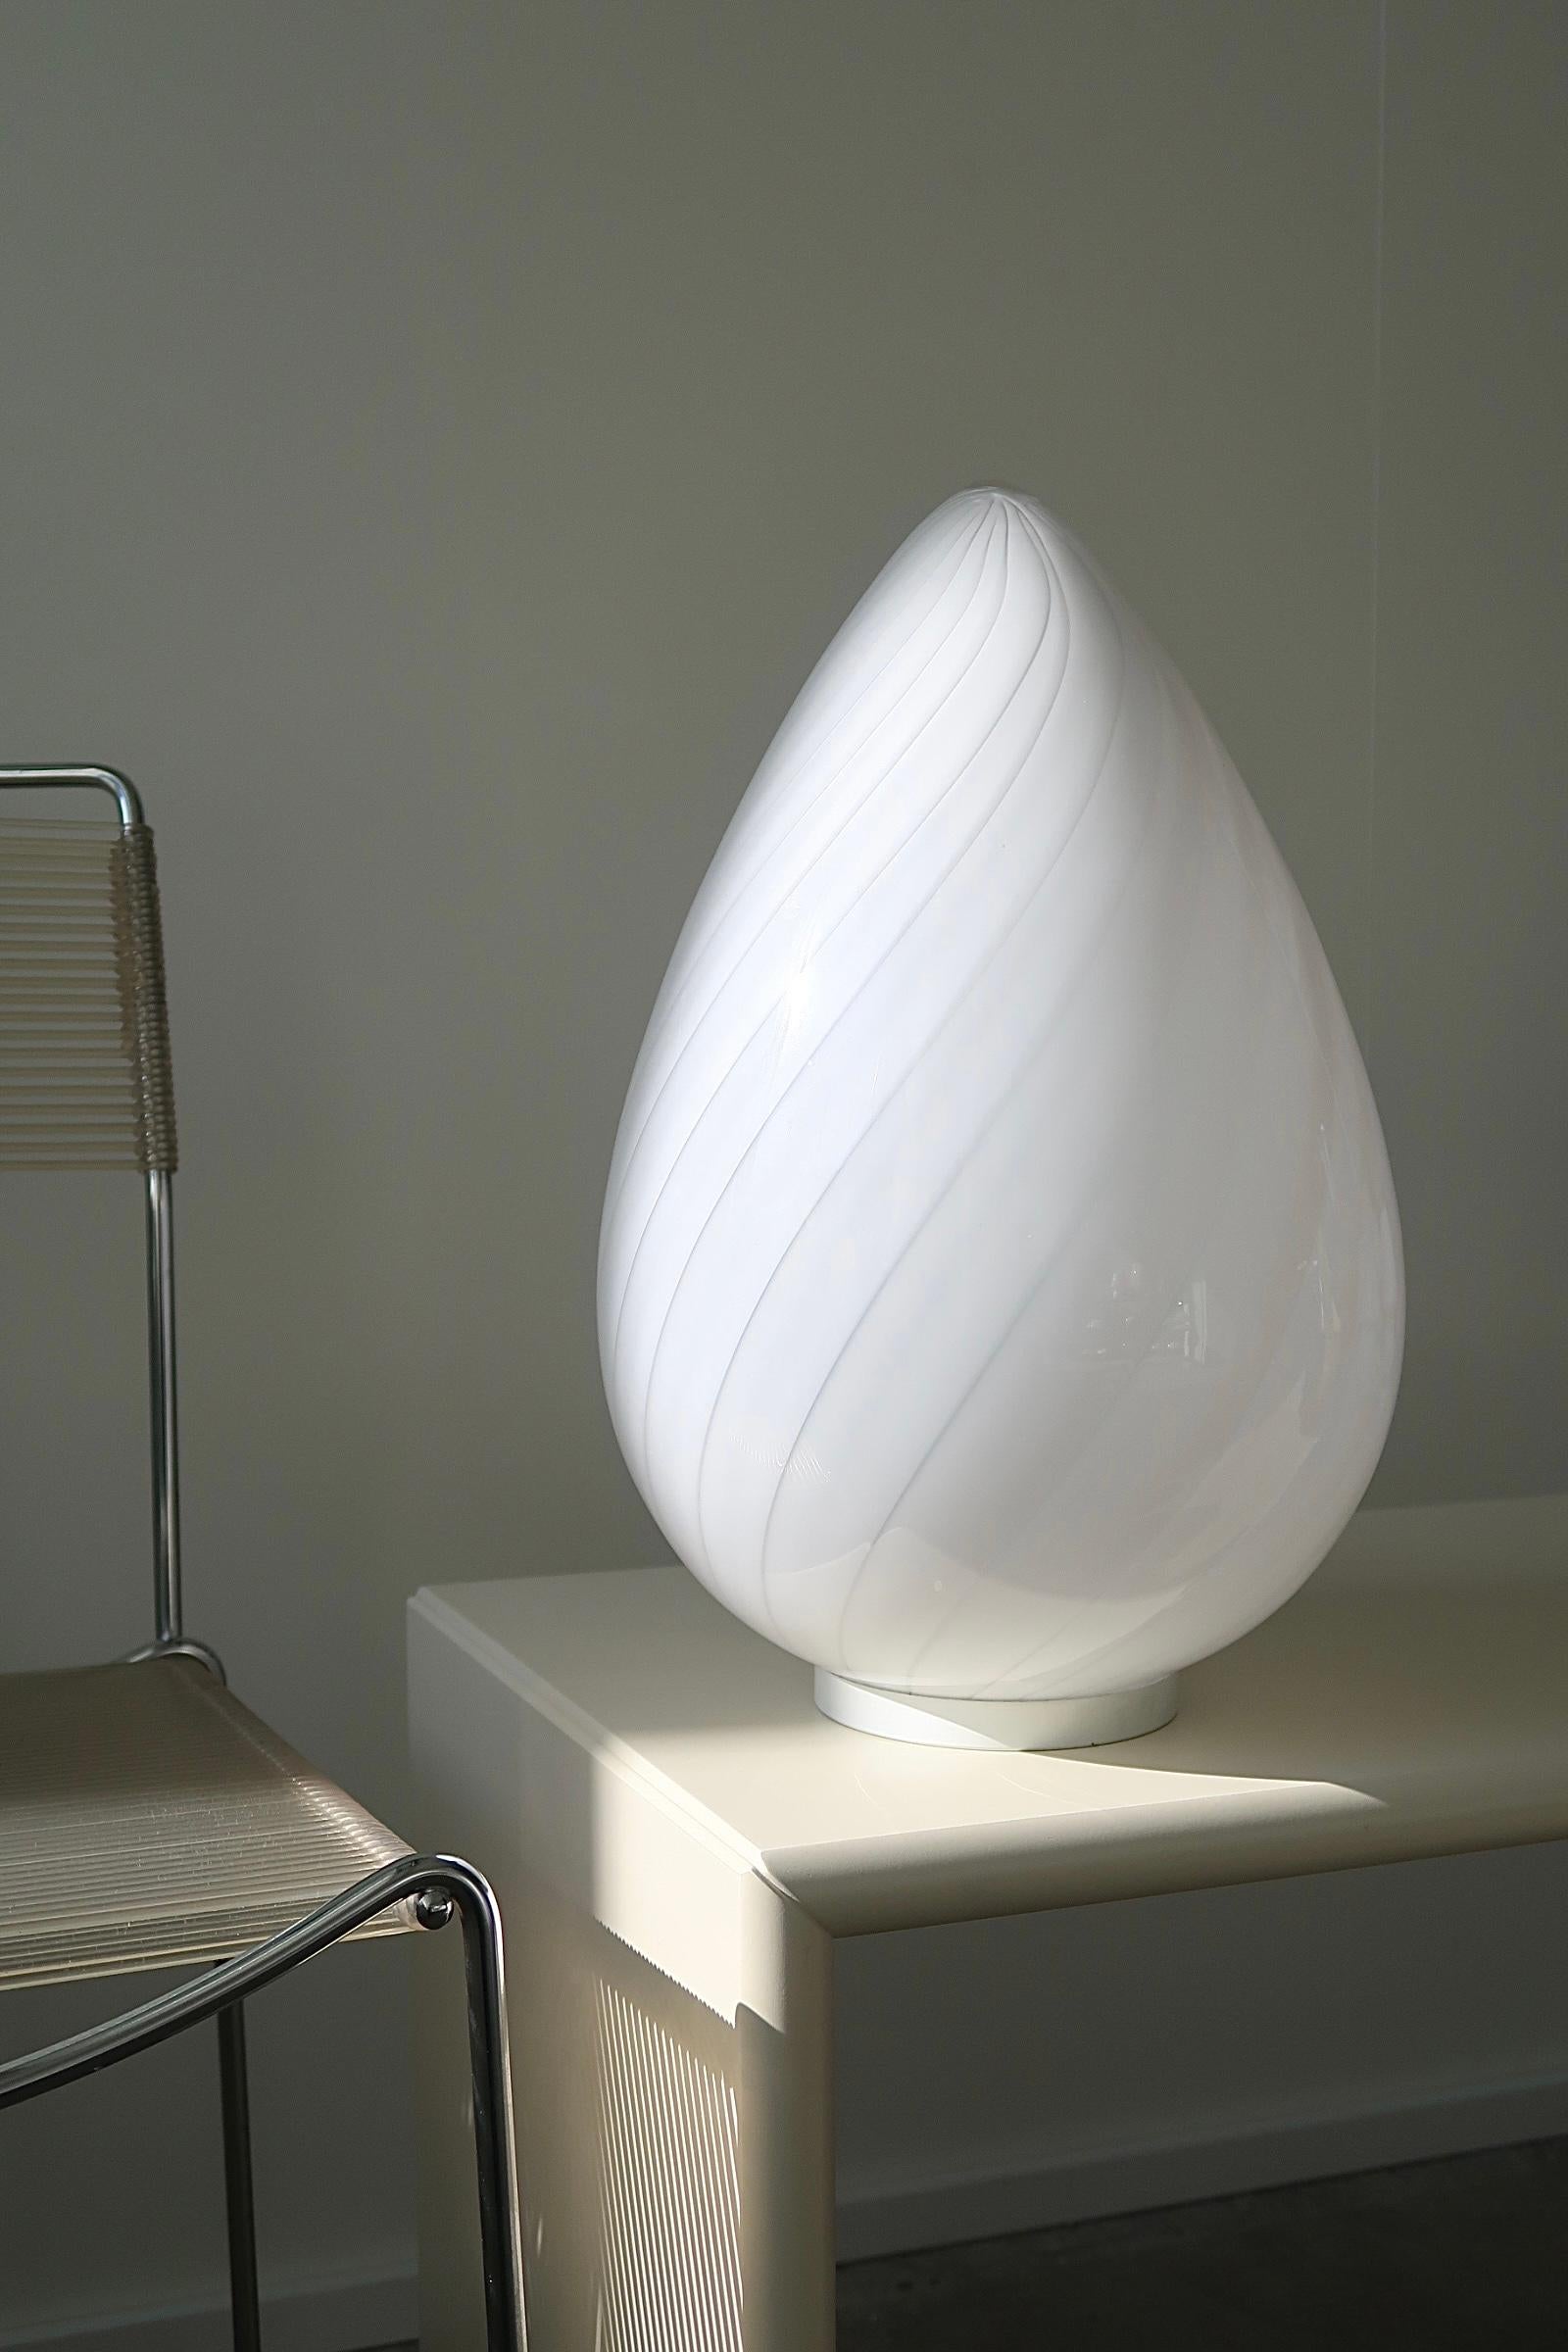 Vintage Murano egg lamp that can be used as a table lamp or floor lamp. Mouth blown in white opal glass with swirl in a beautiful oval shape like an egg and is therefore known as ''egg lamp''. An absolutely fantastic, sculptural lamp. Handmade in